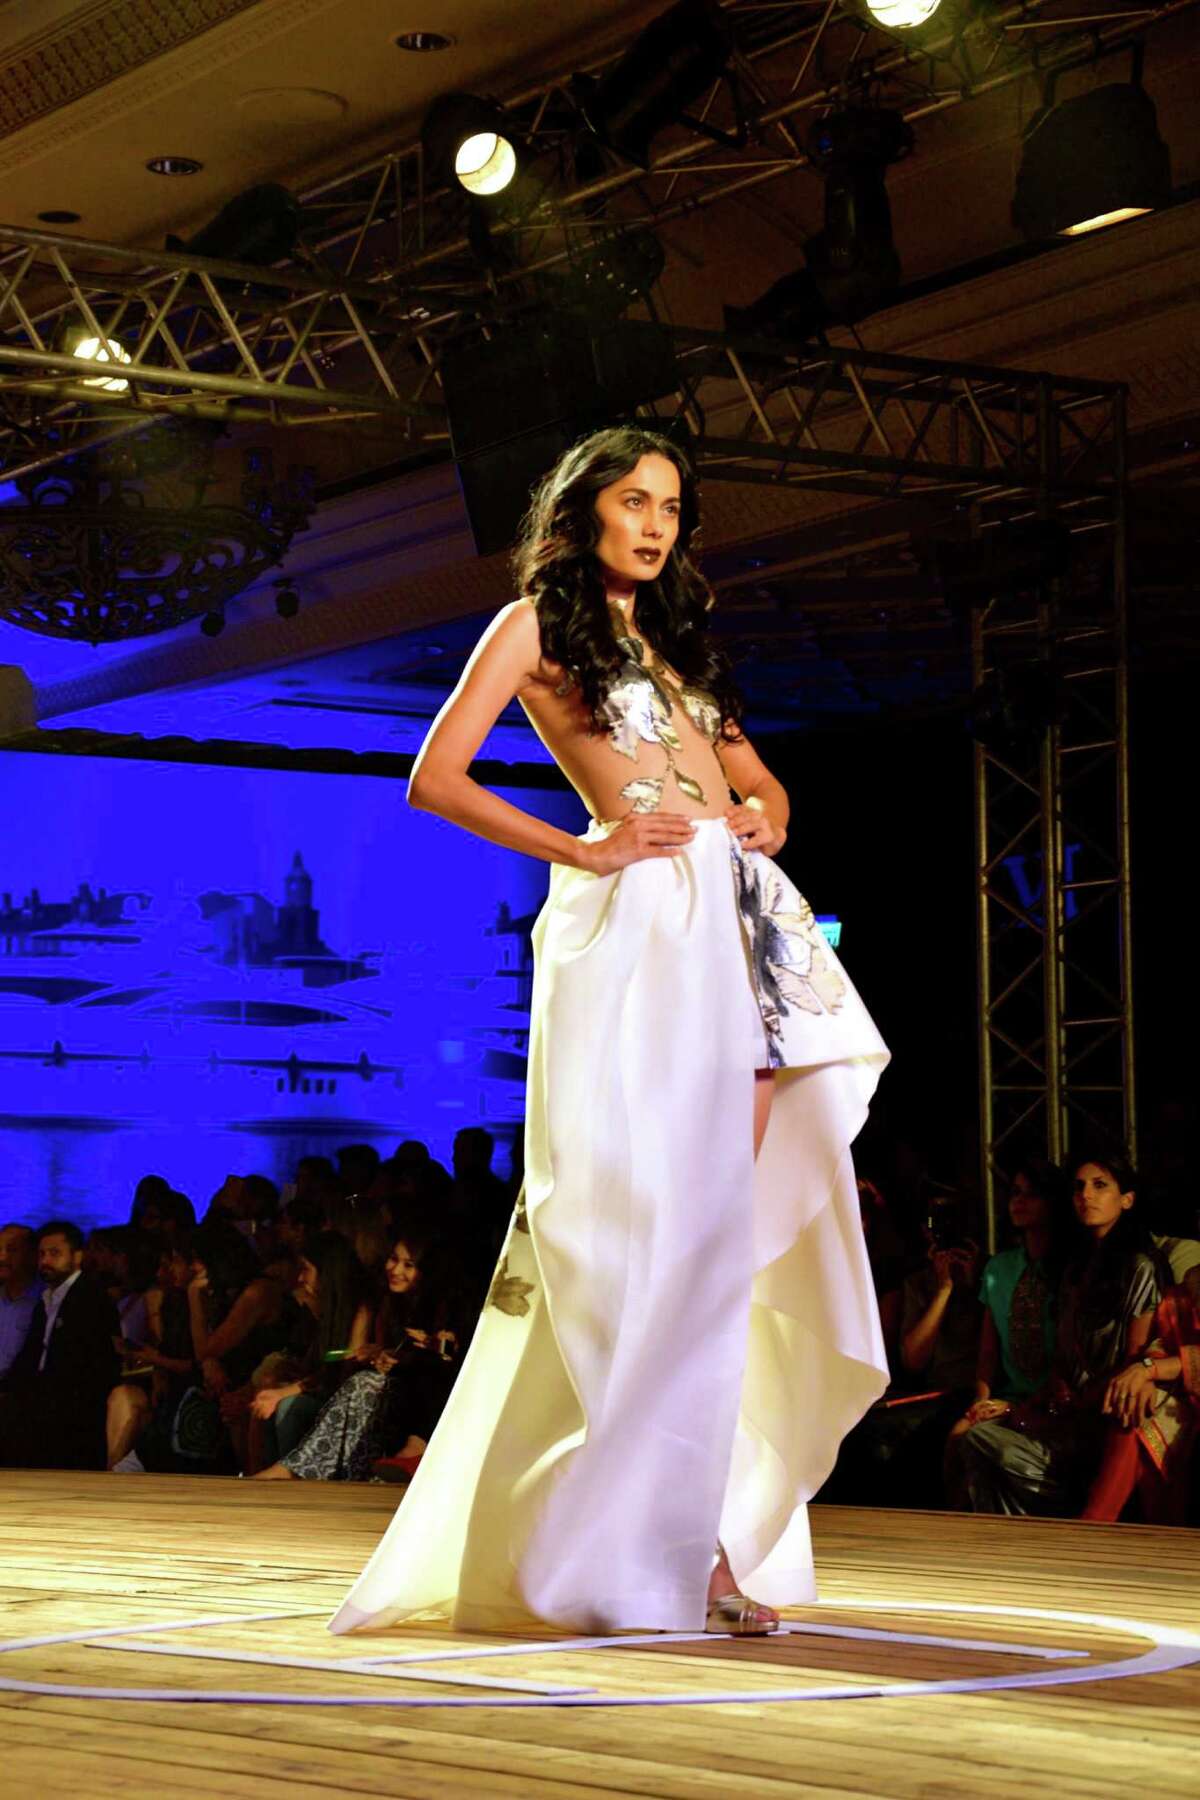 Monisha Jaising's couture collection for the Fashion Design Council of India's (FDCI) Amazon India Couture Week 2015 on day three centered around a nautical theme called The Sailing Bride at the Taj Palace Hotel in New Delhi, India.